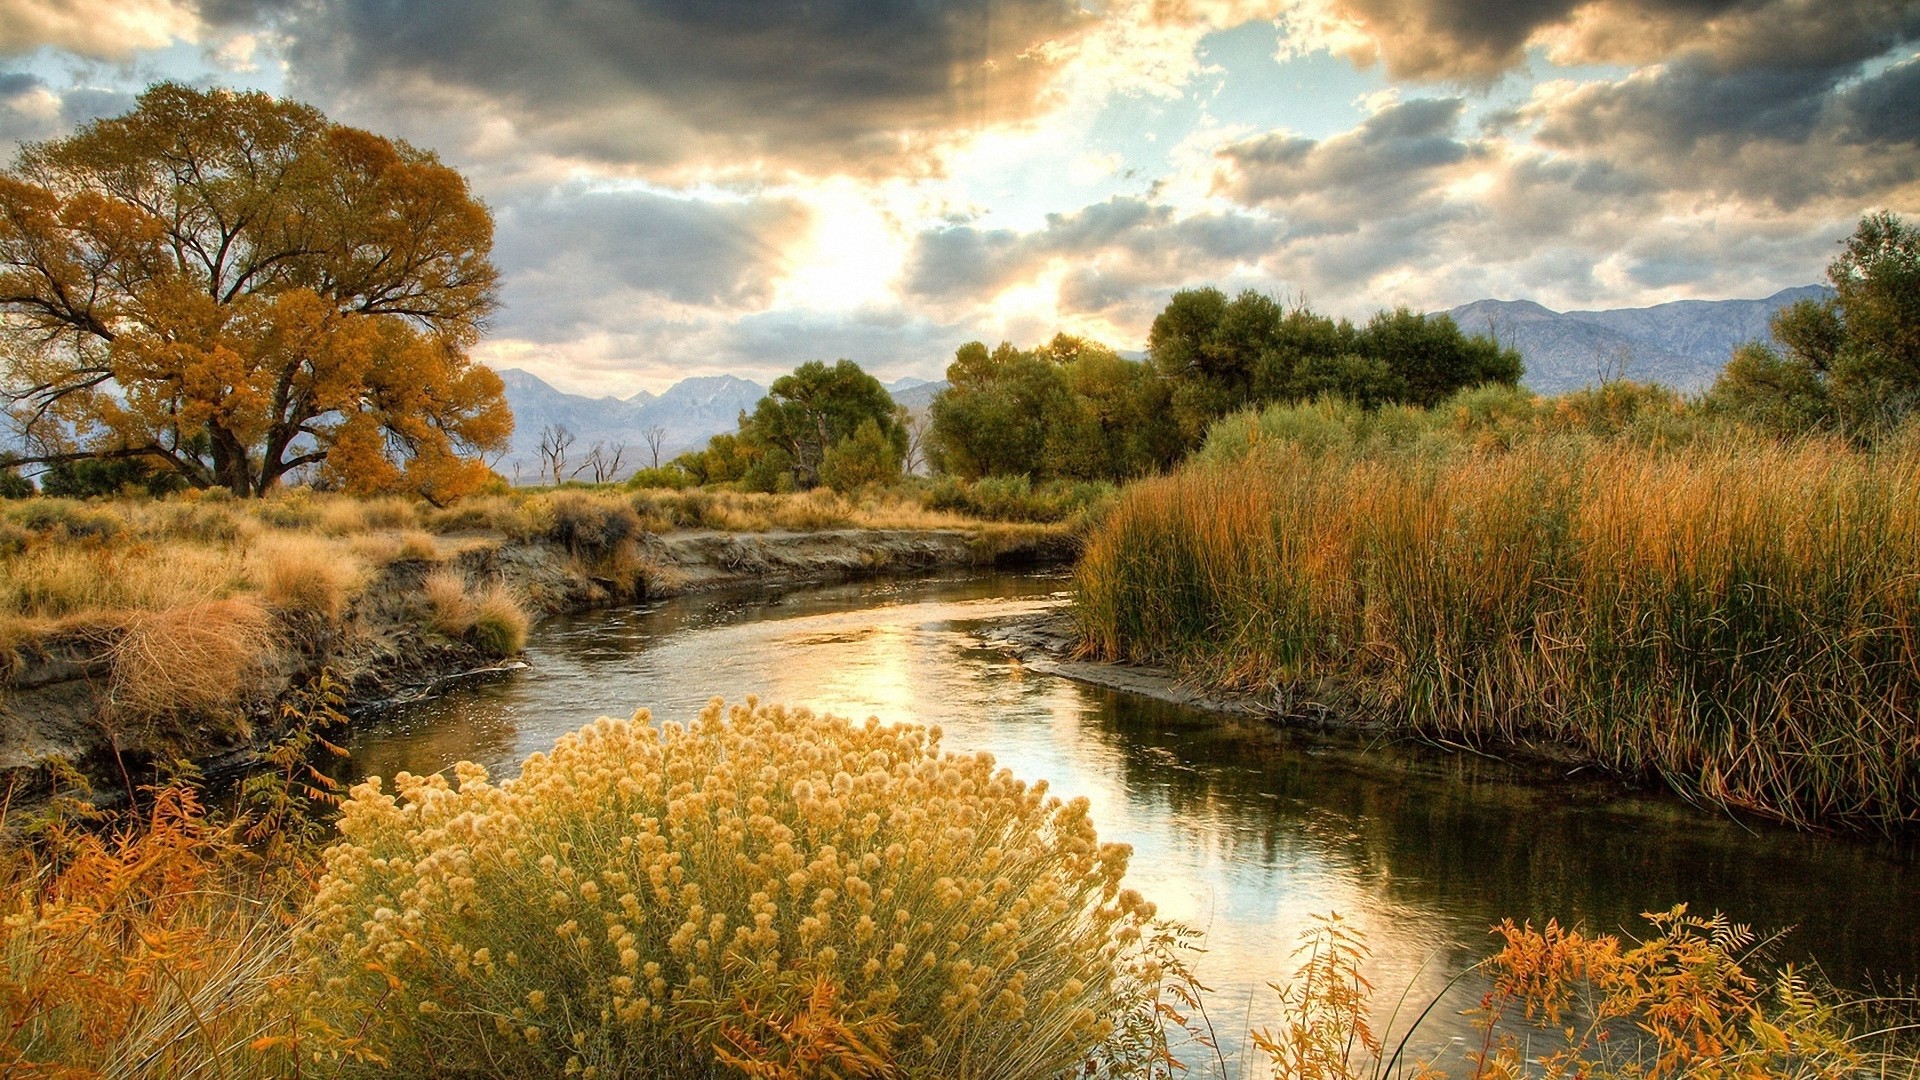 1920x1080 wallpapers: bushes, river, sun, clouds (image)